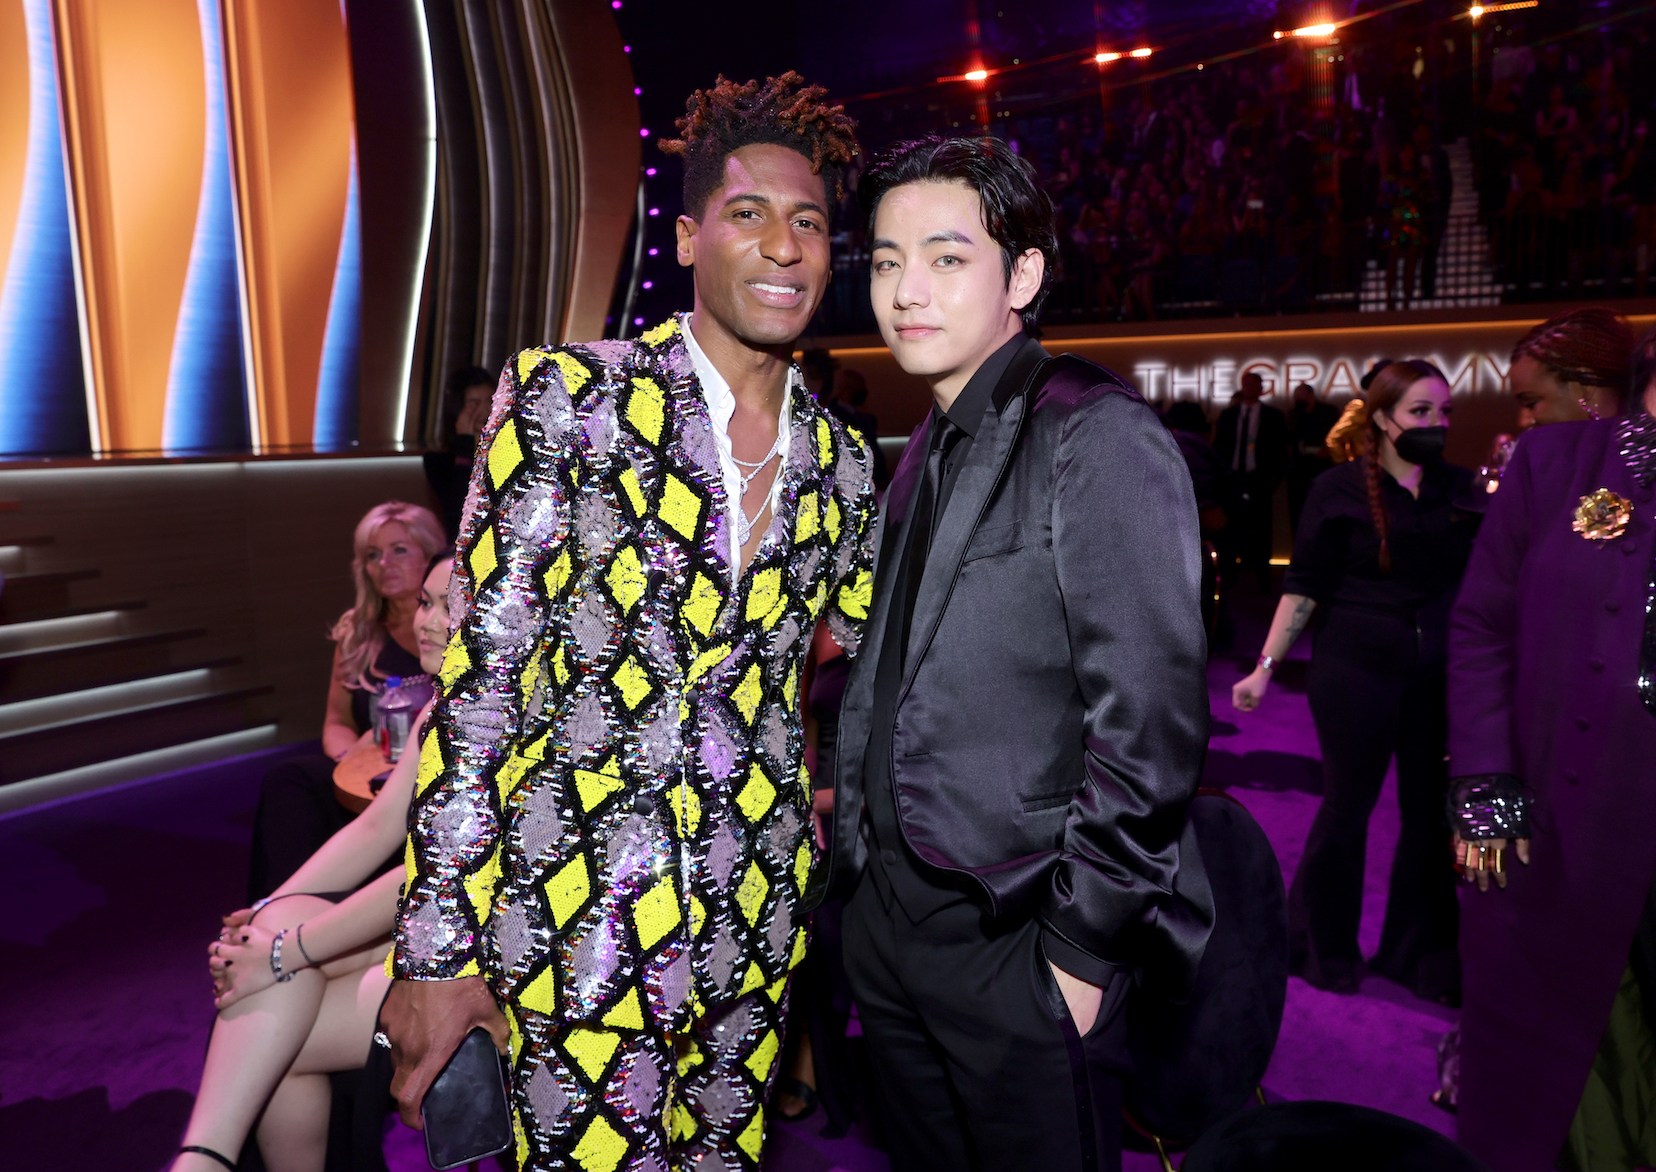 Jon Batiste and V of BTS attend the 64th Annual GRAMMY Awards